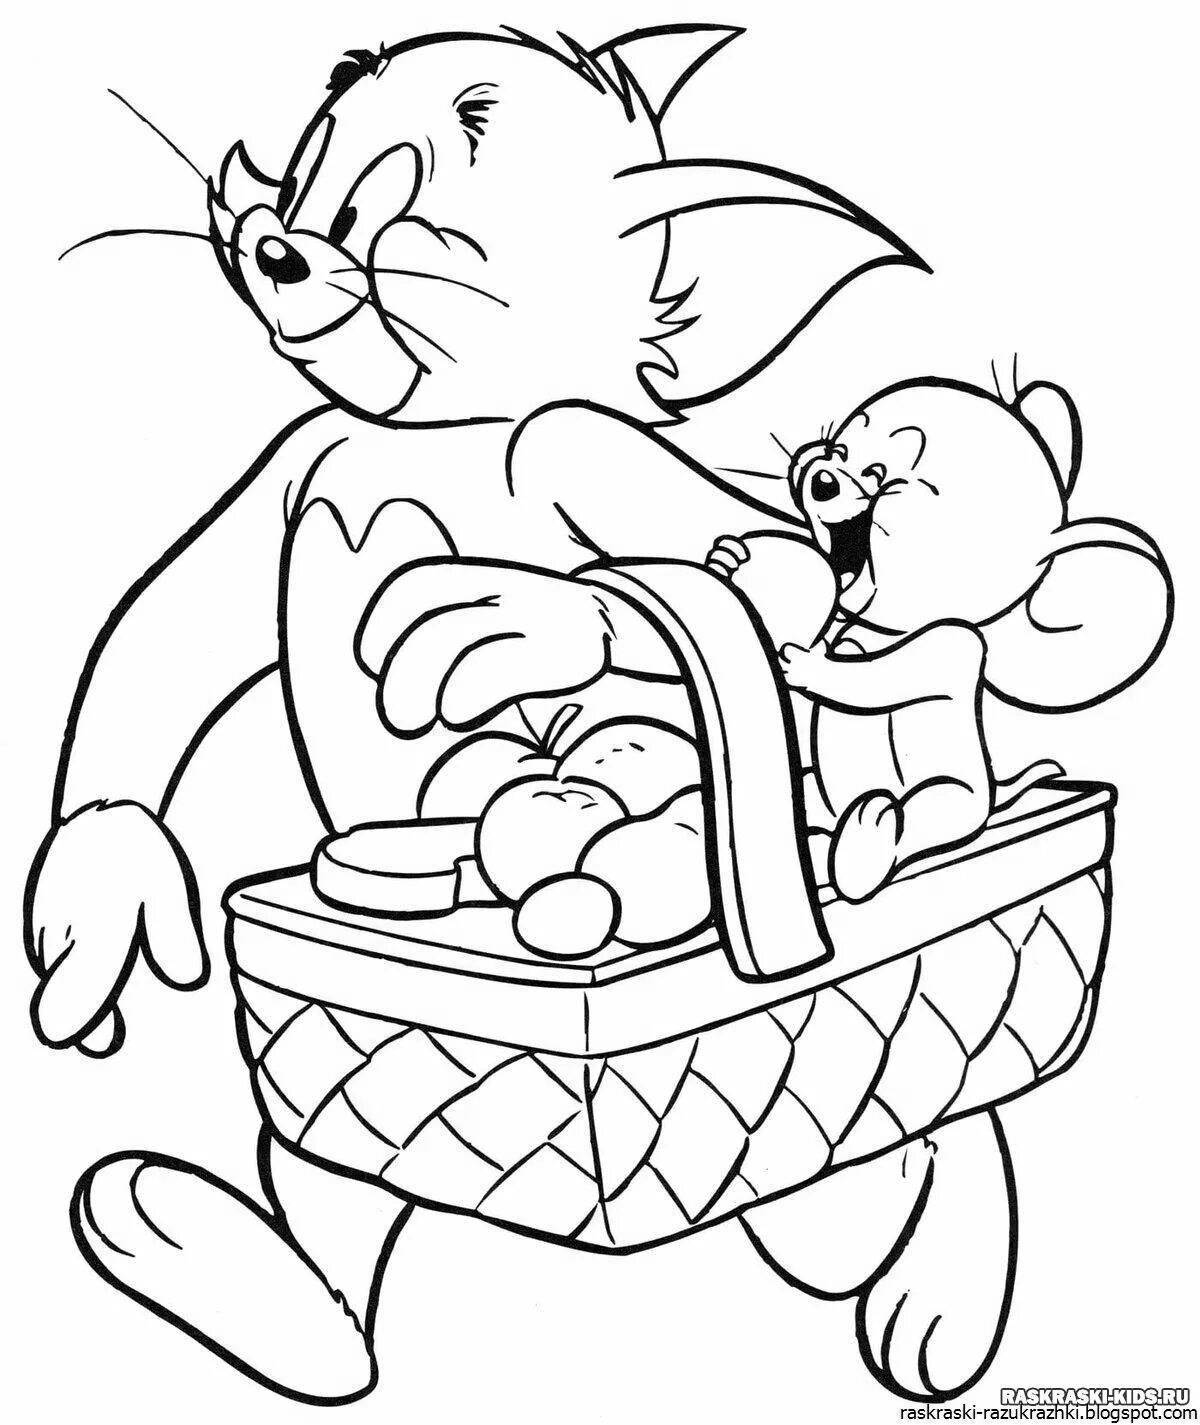 Coloring page 4 5 years for boys